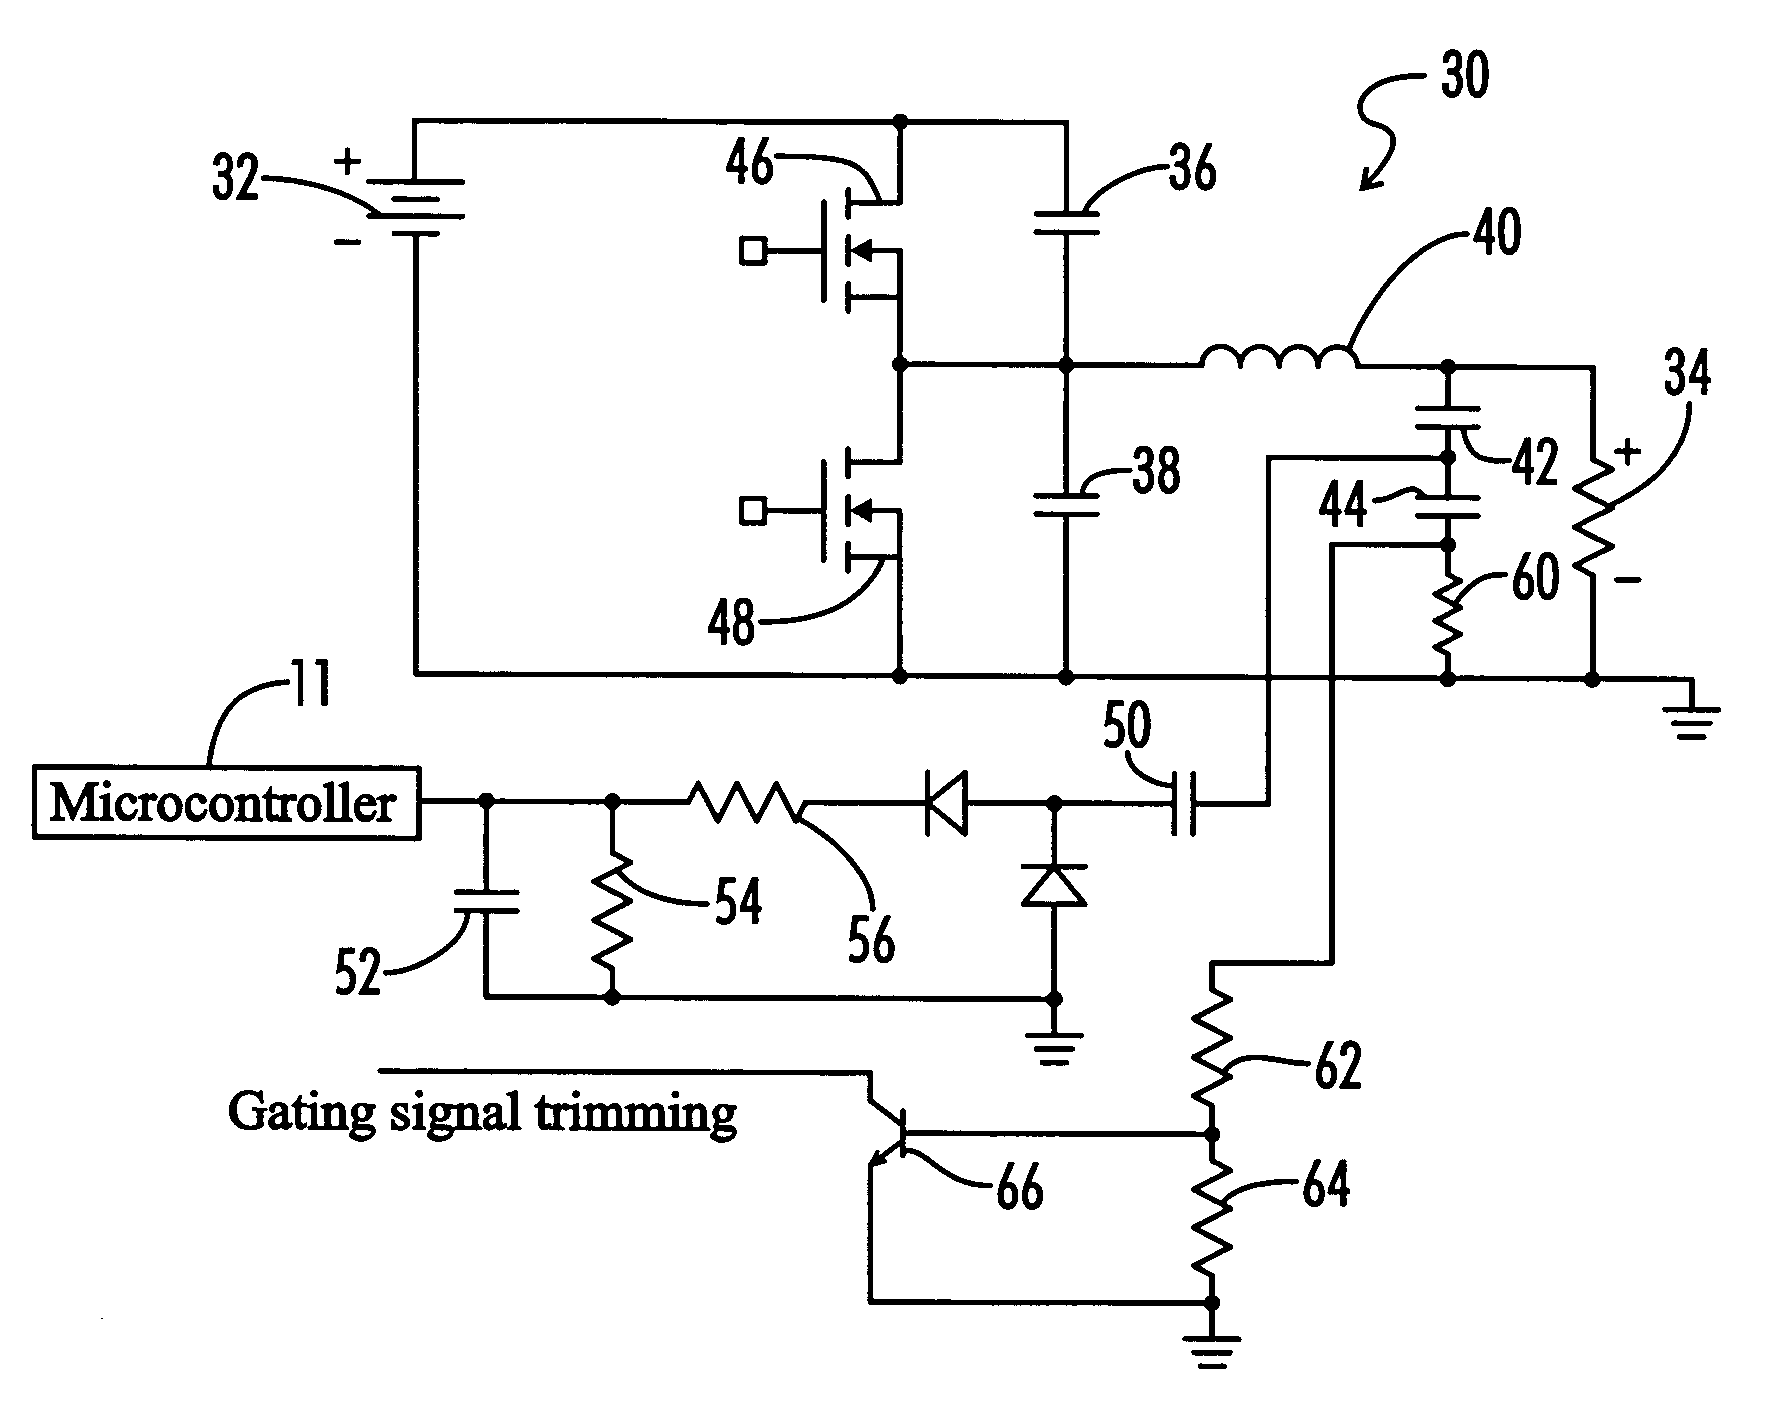 Electronic ballast with lossless snubber capacitor circuit